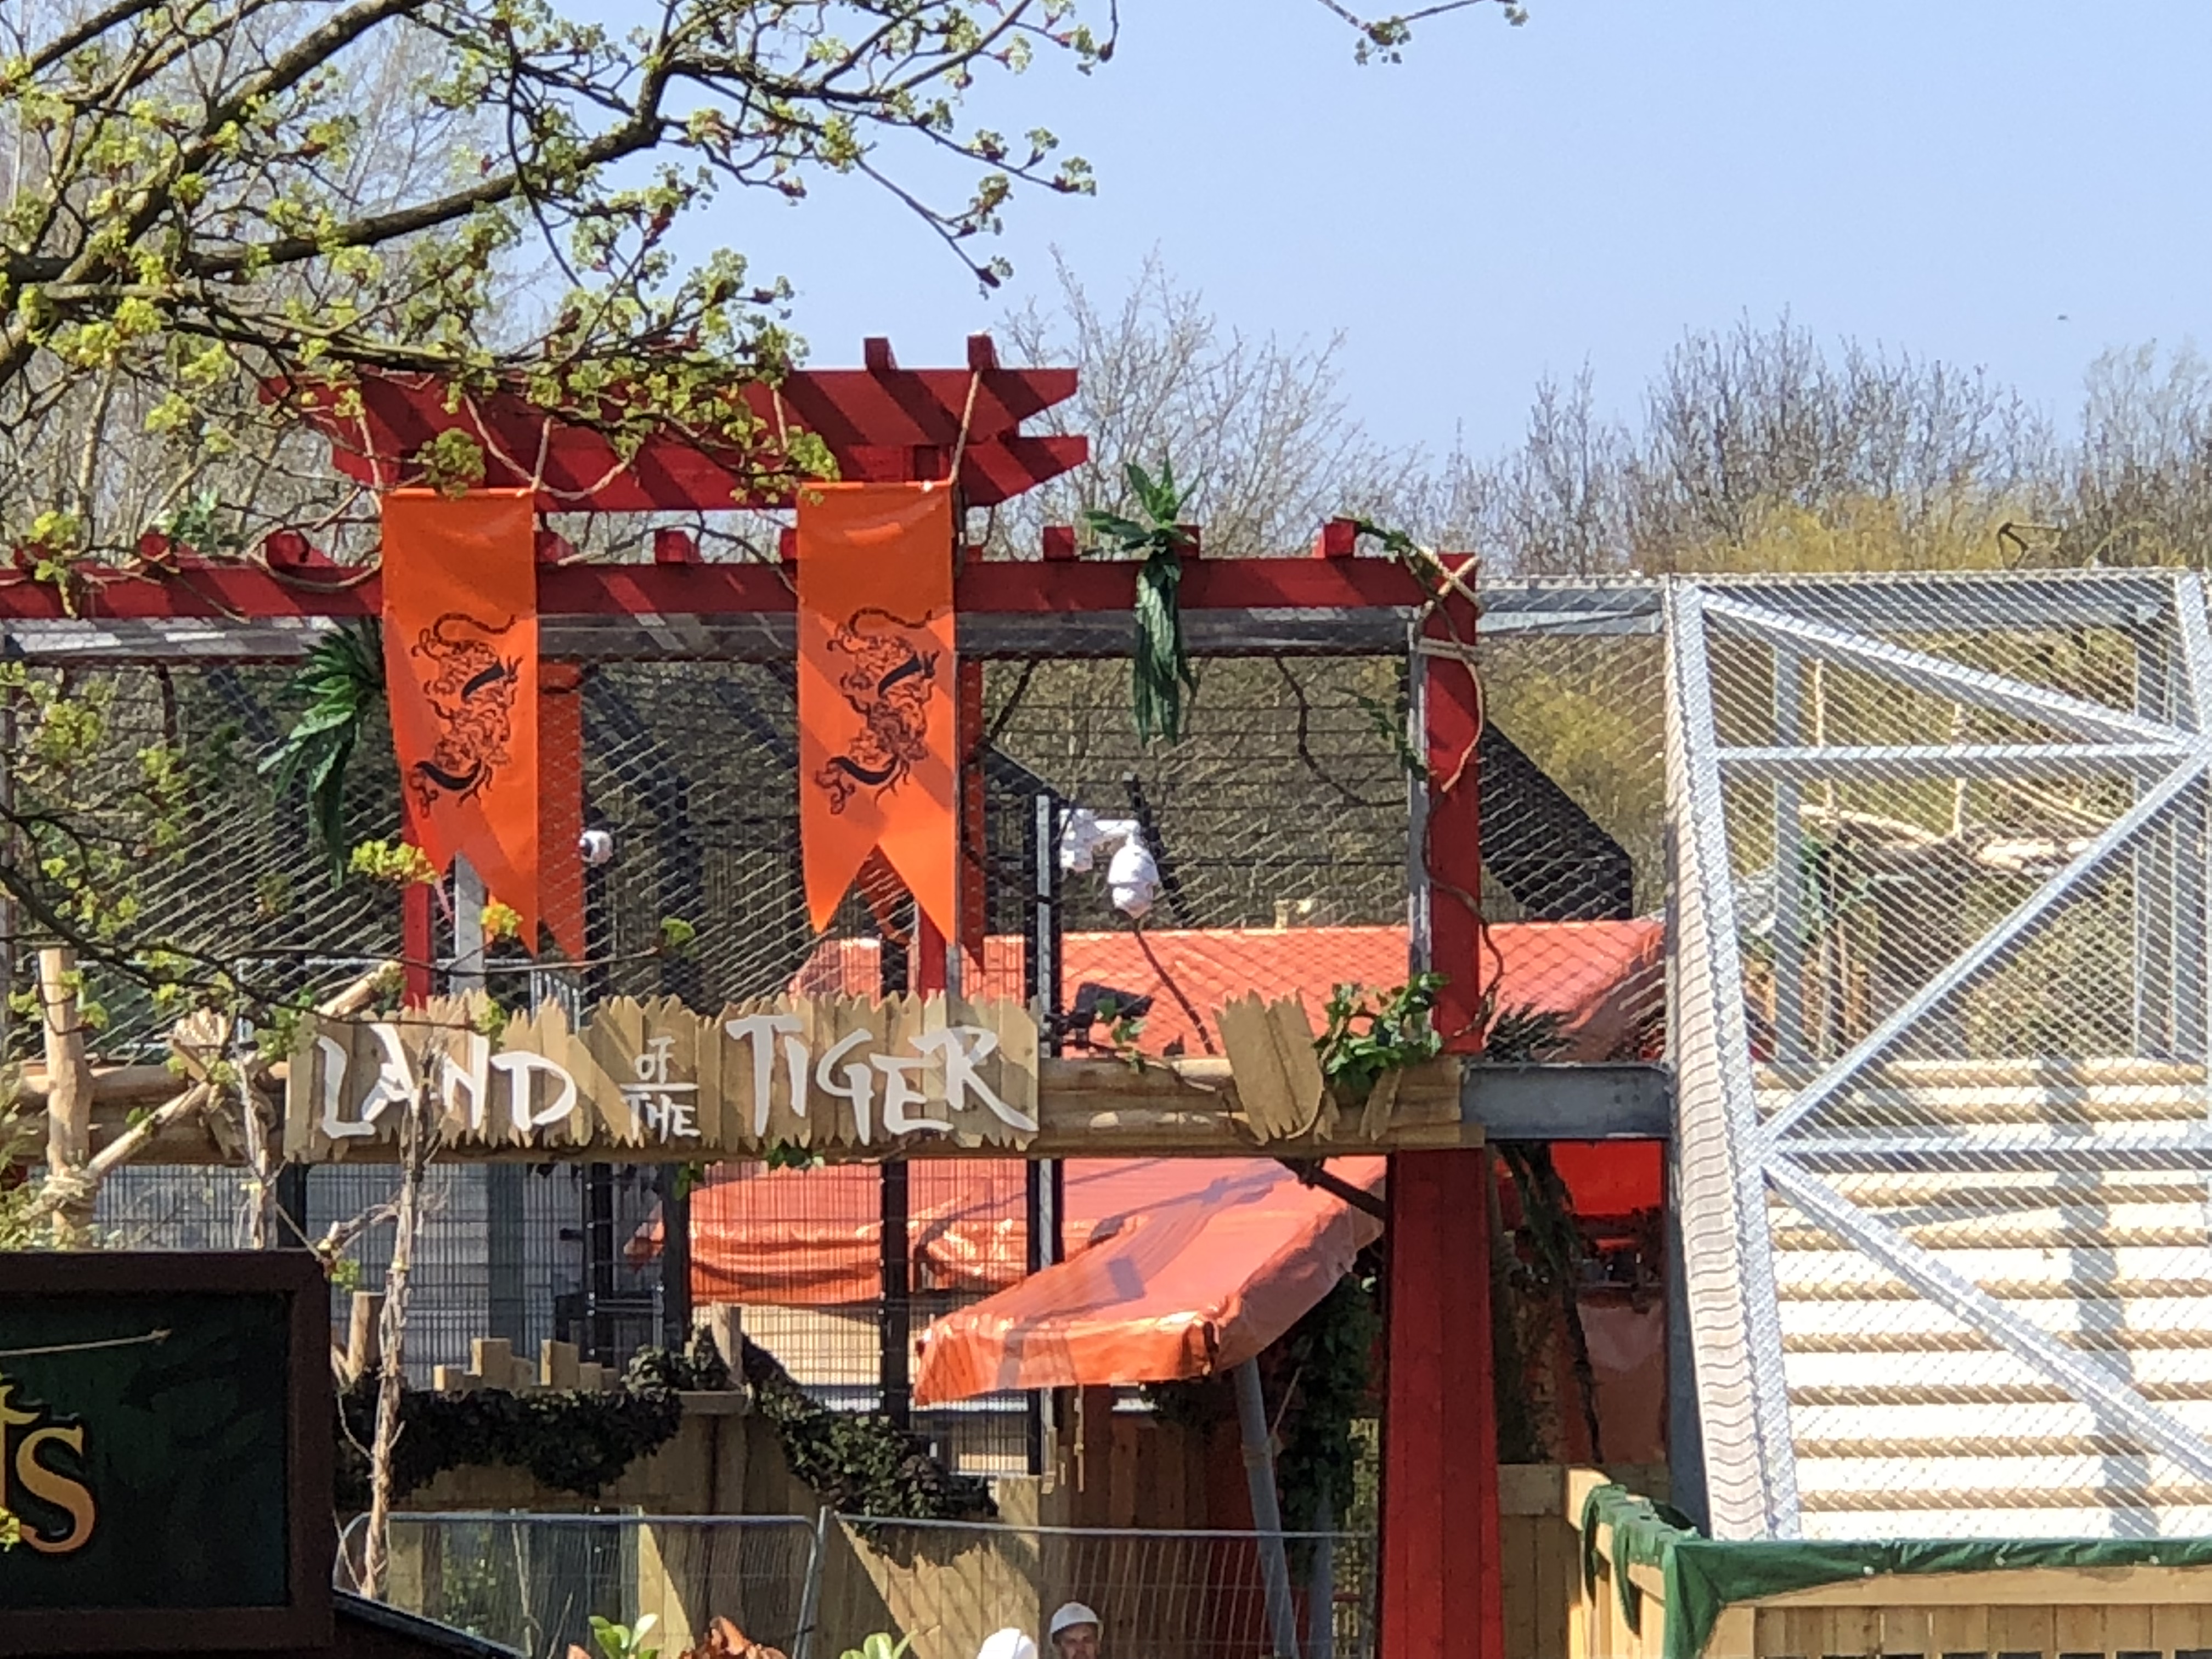 Land of the Tiger Build Update